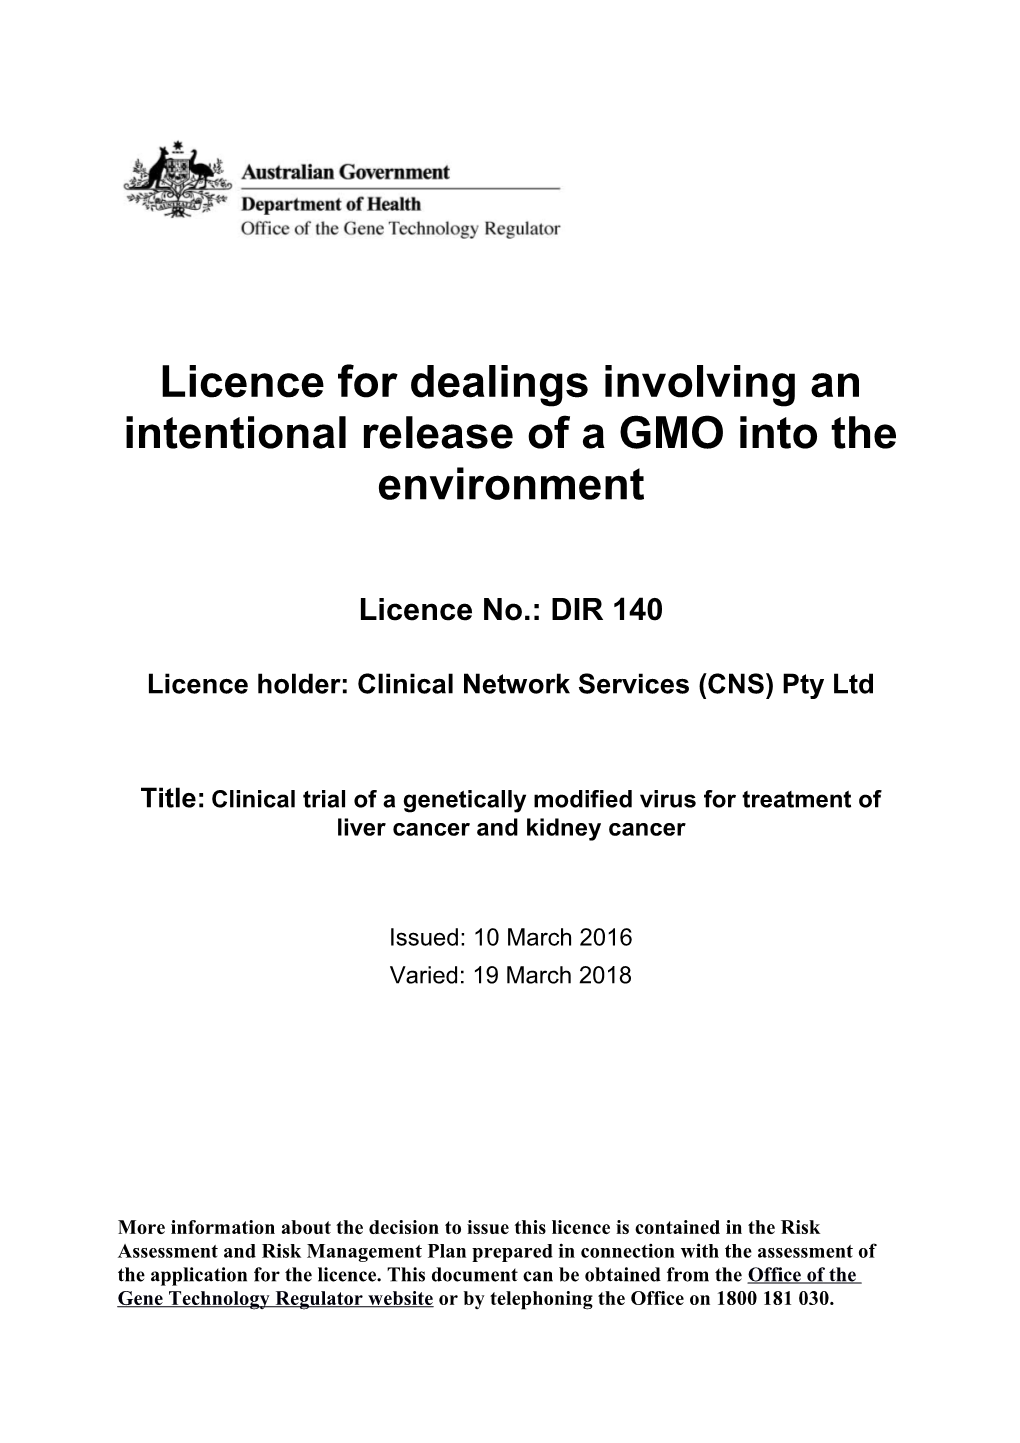 DIR 140 - Licence Conditions